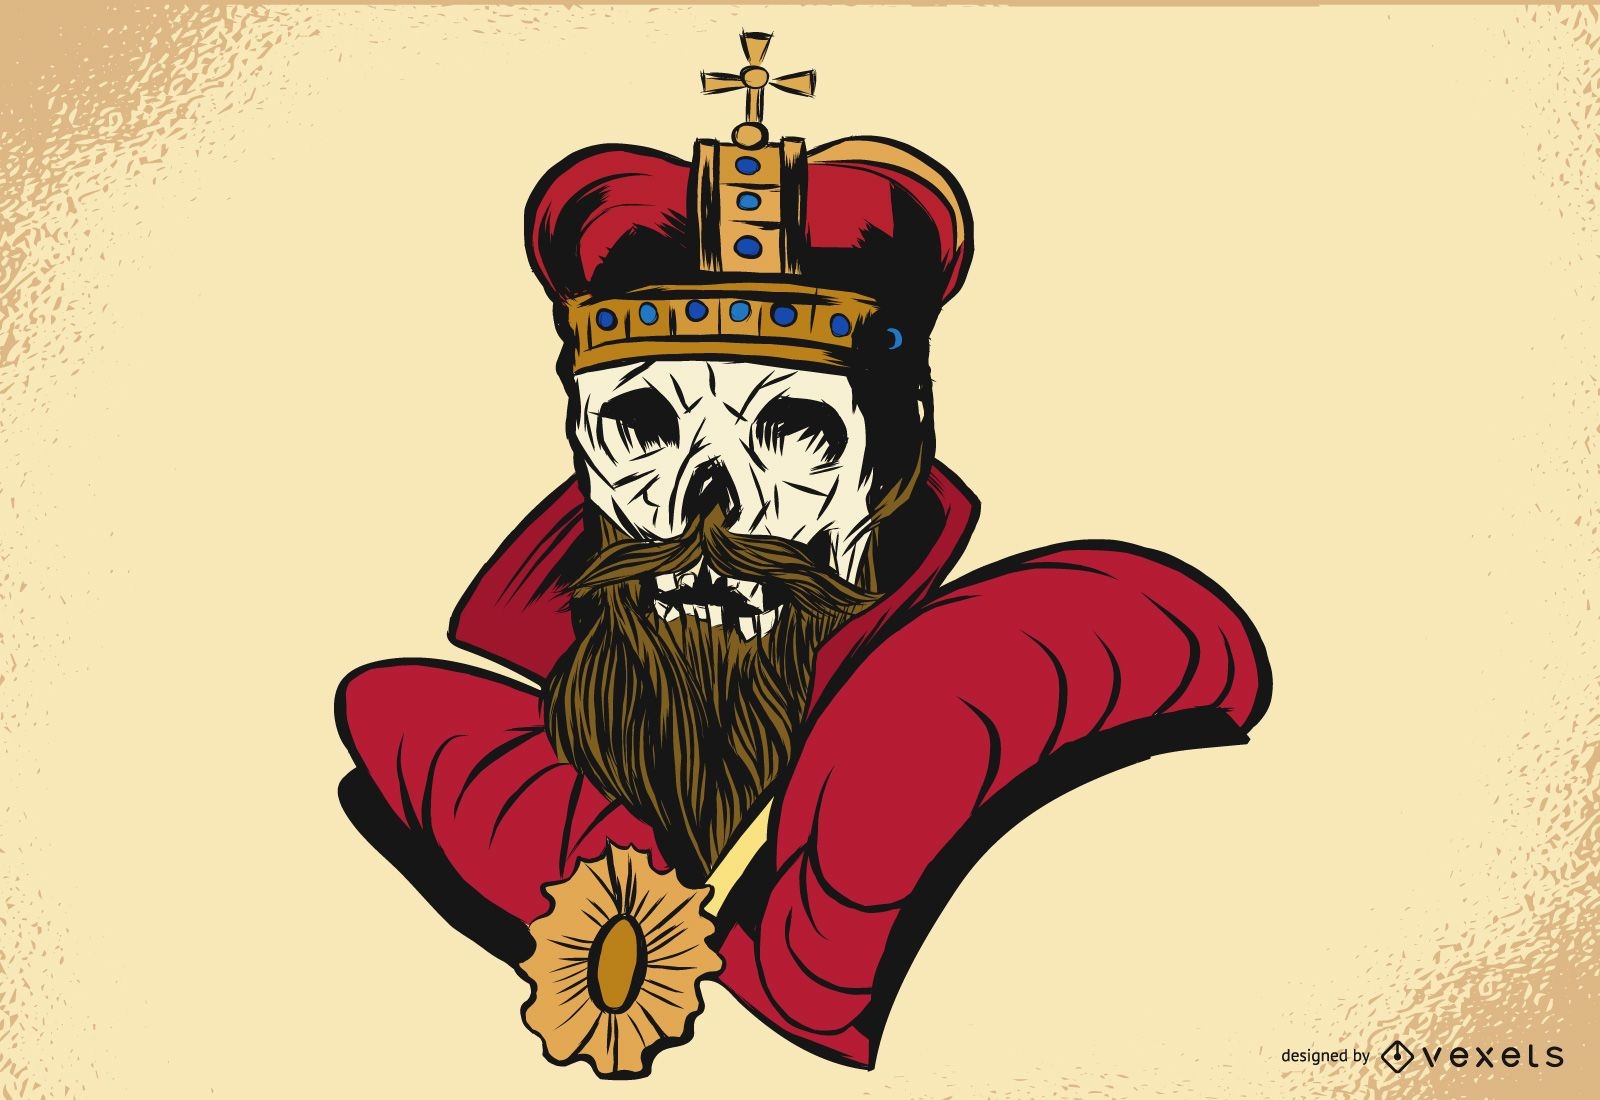 Skull With Crown - Vector download